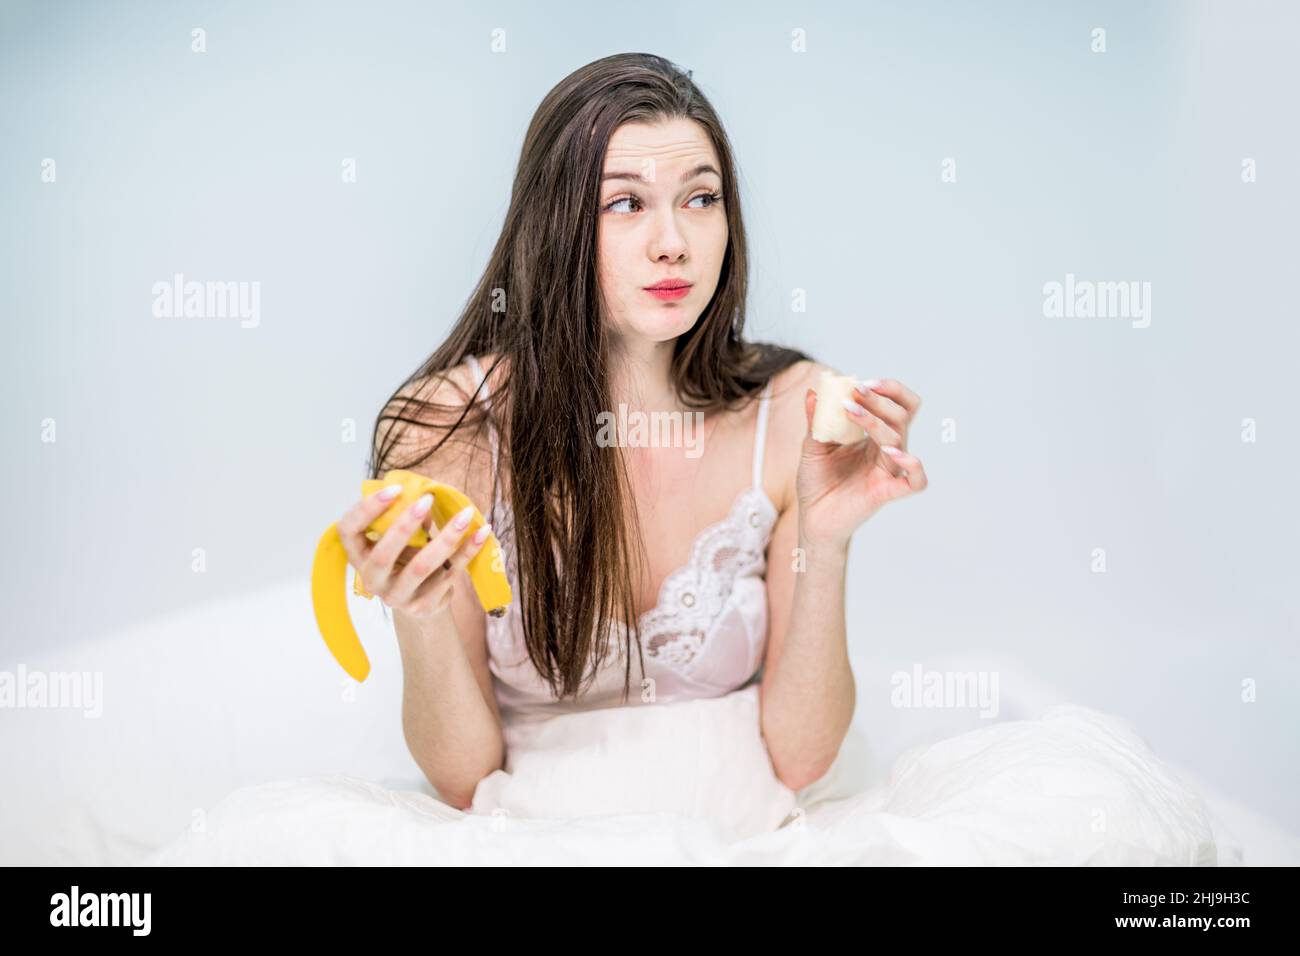 The brunette is having breakfast with fruit. The girl is sitting on the bed, wrapped in a blanket, and enjoying eating a banana. Stock Photo